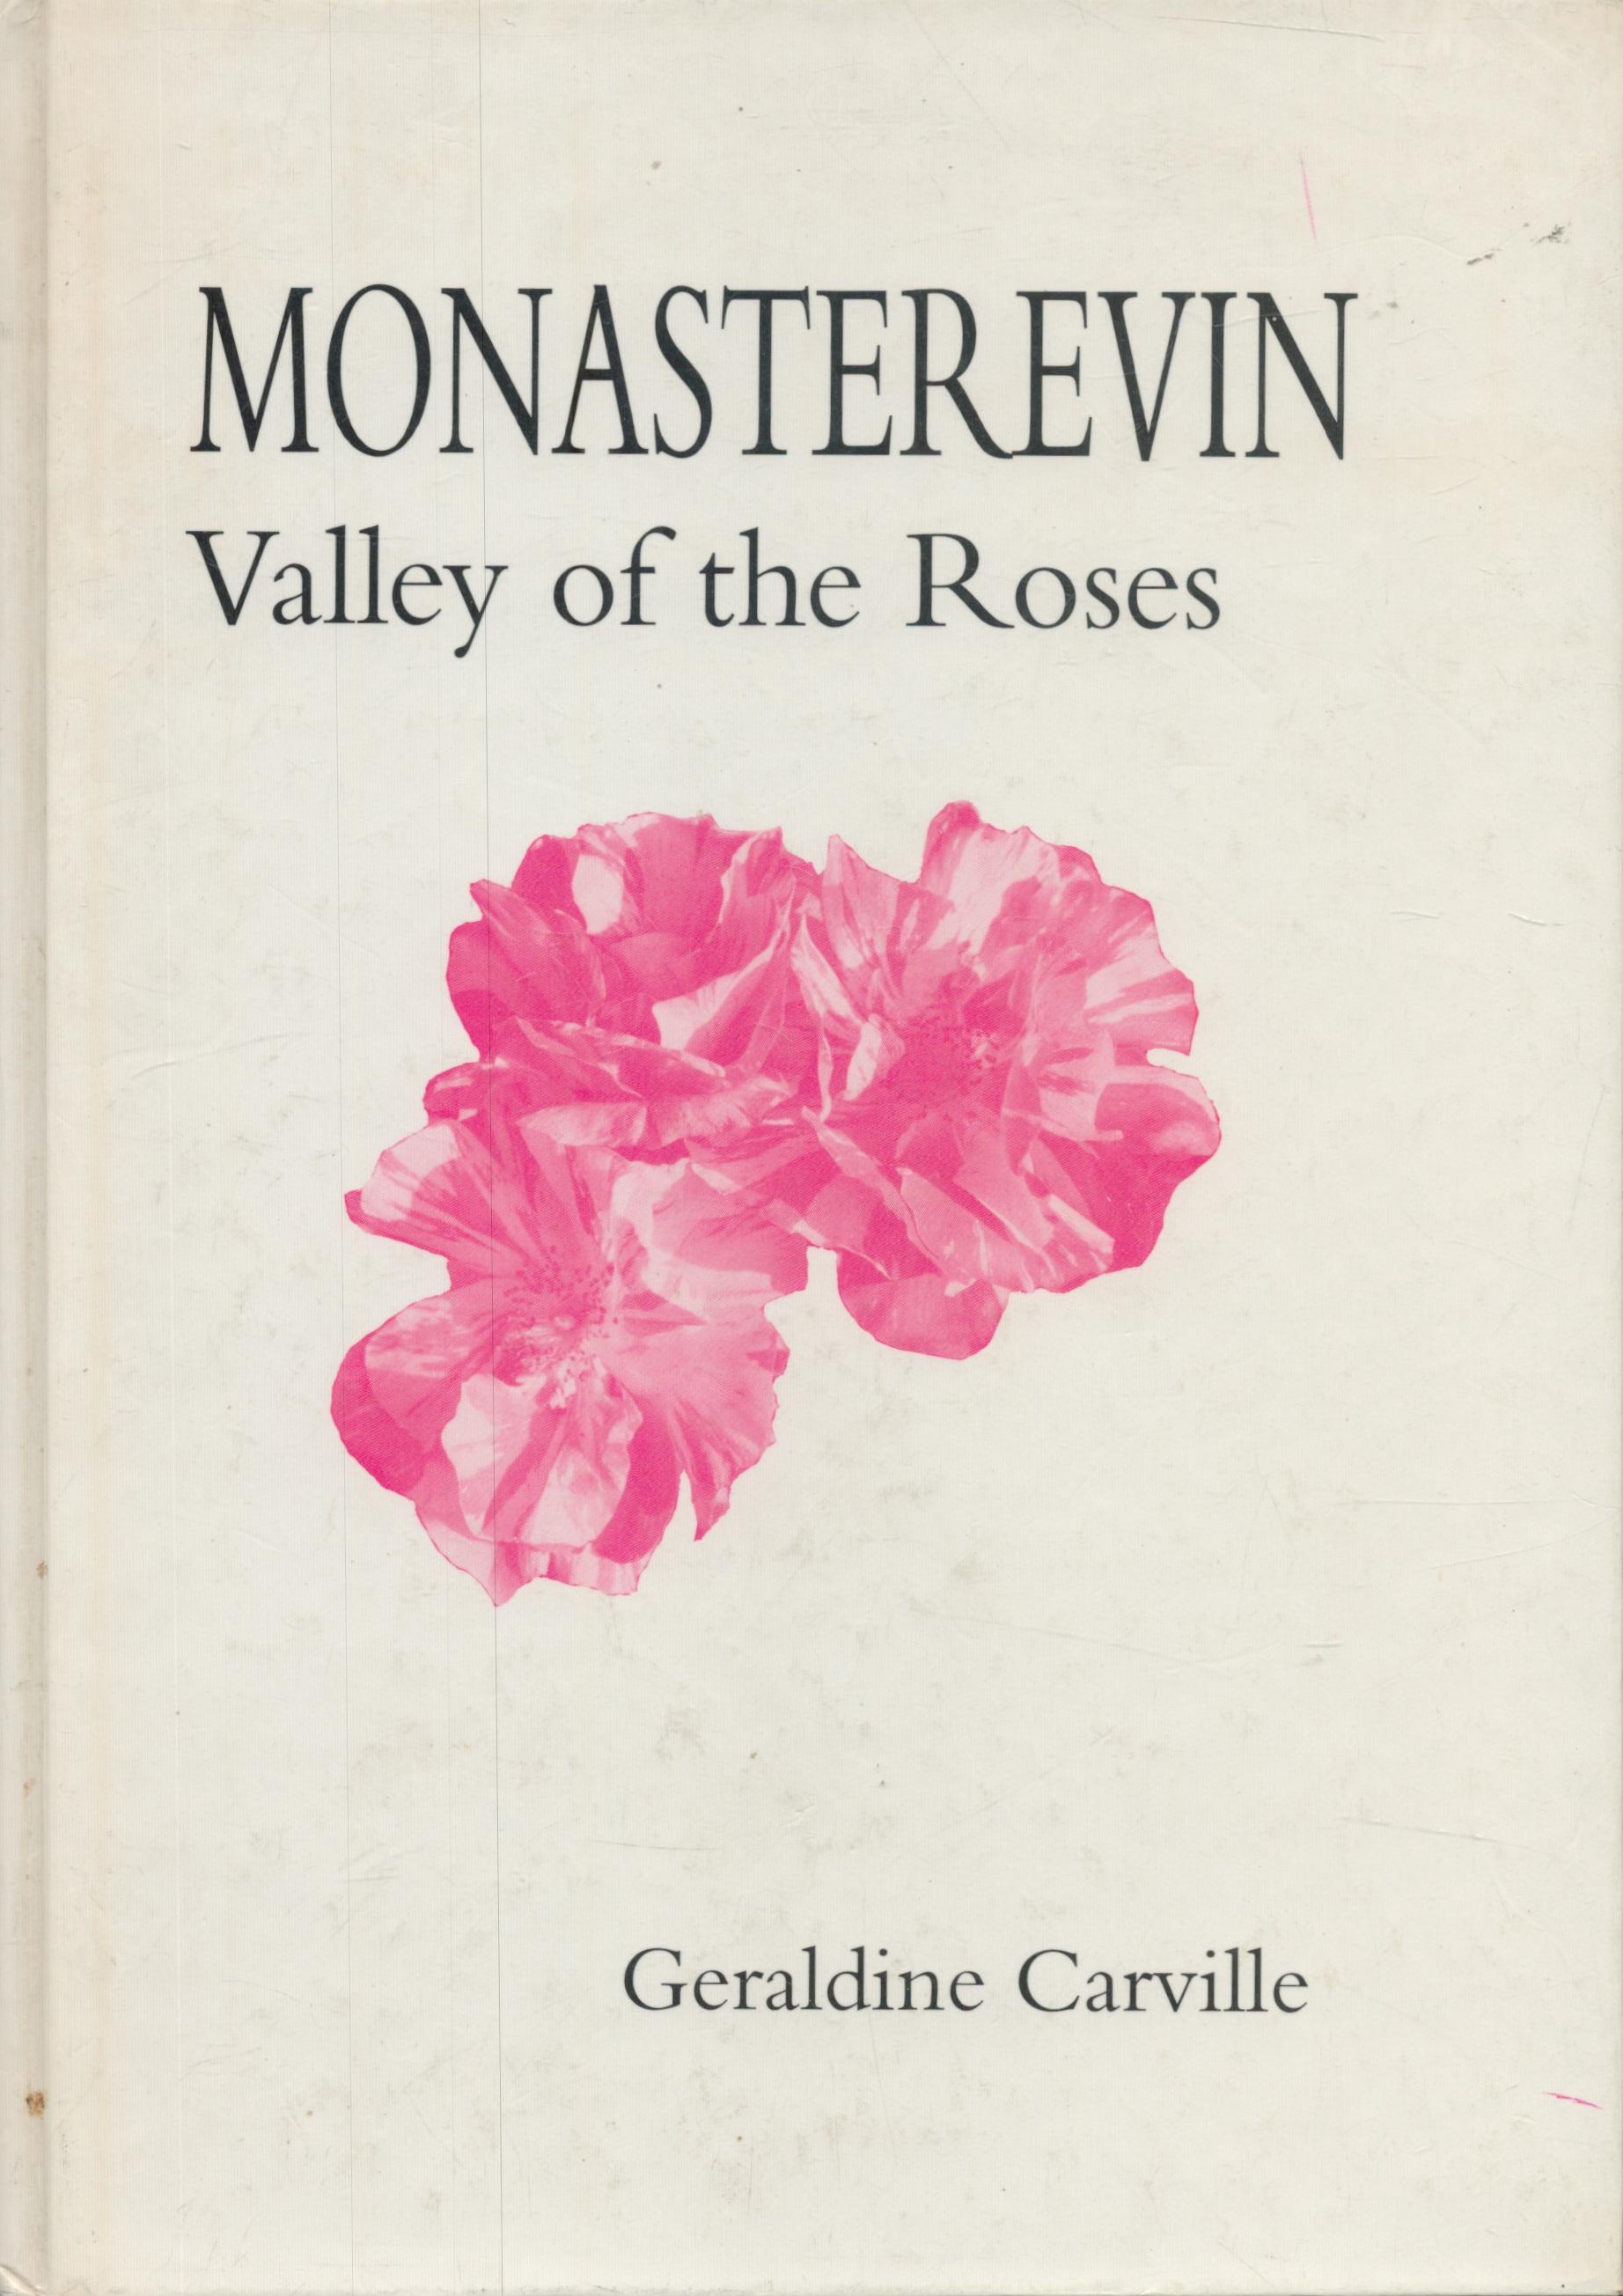 Monasterevin: Valley of the Roses by Geraldine Carville signed by author, First Edition 1989